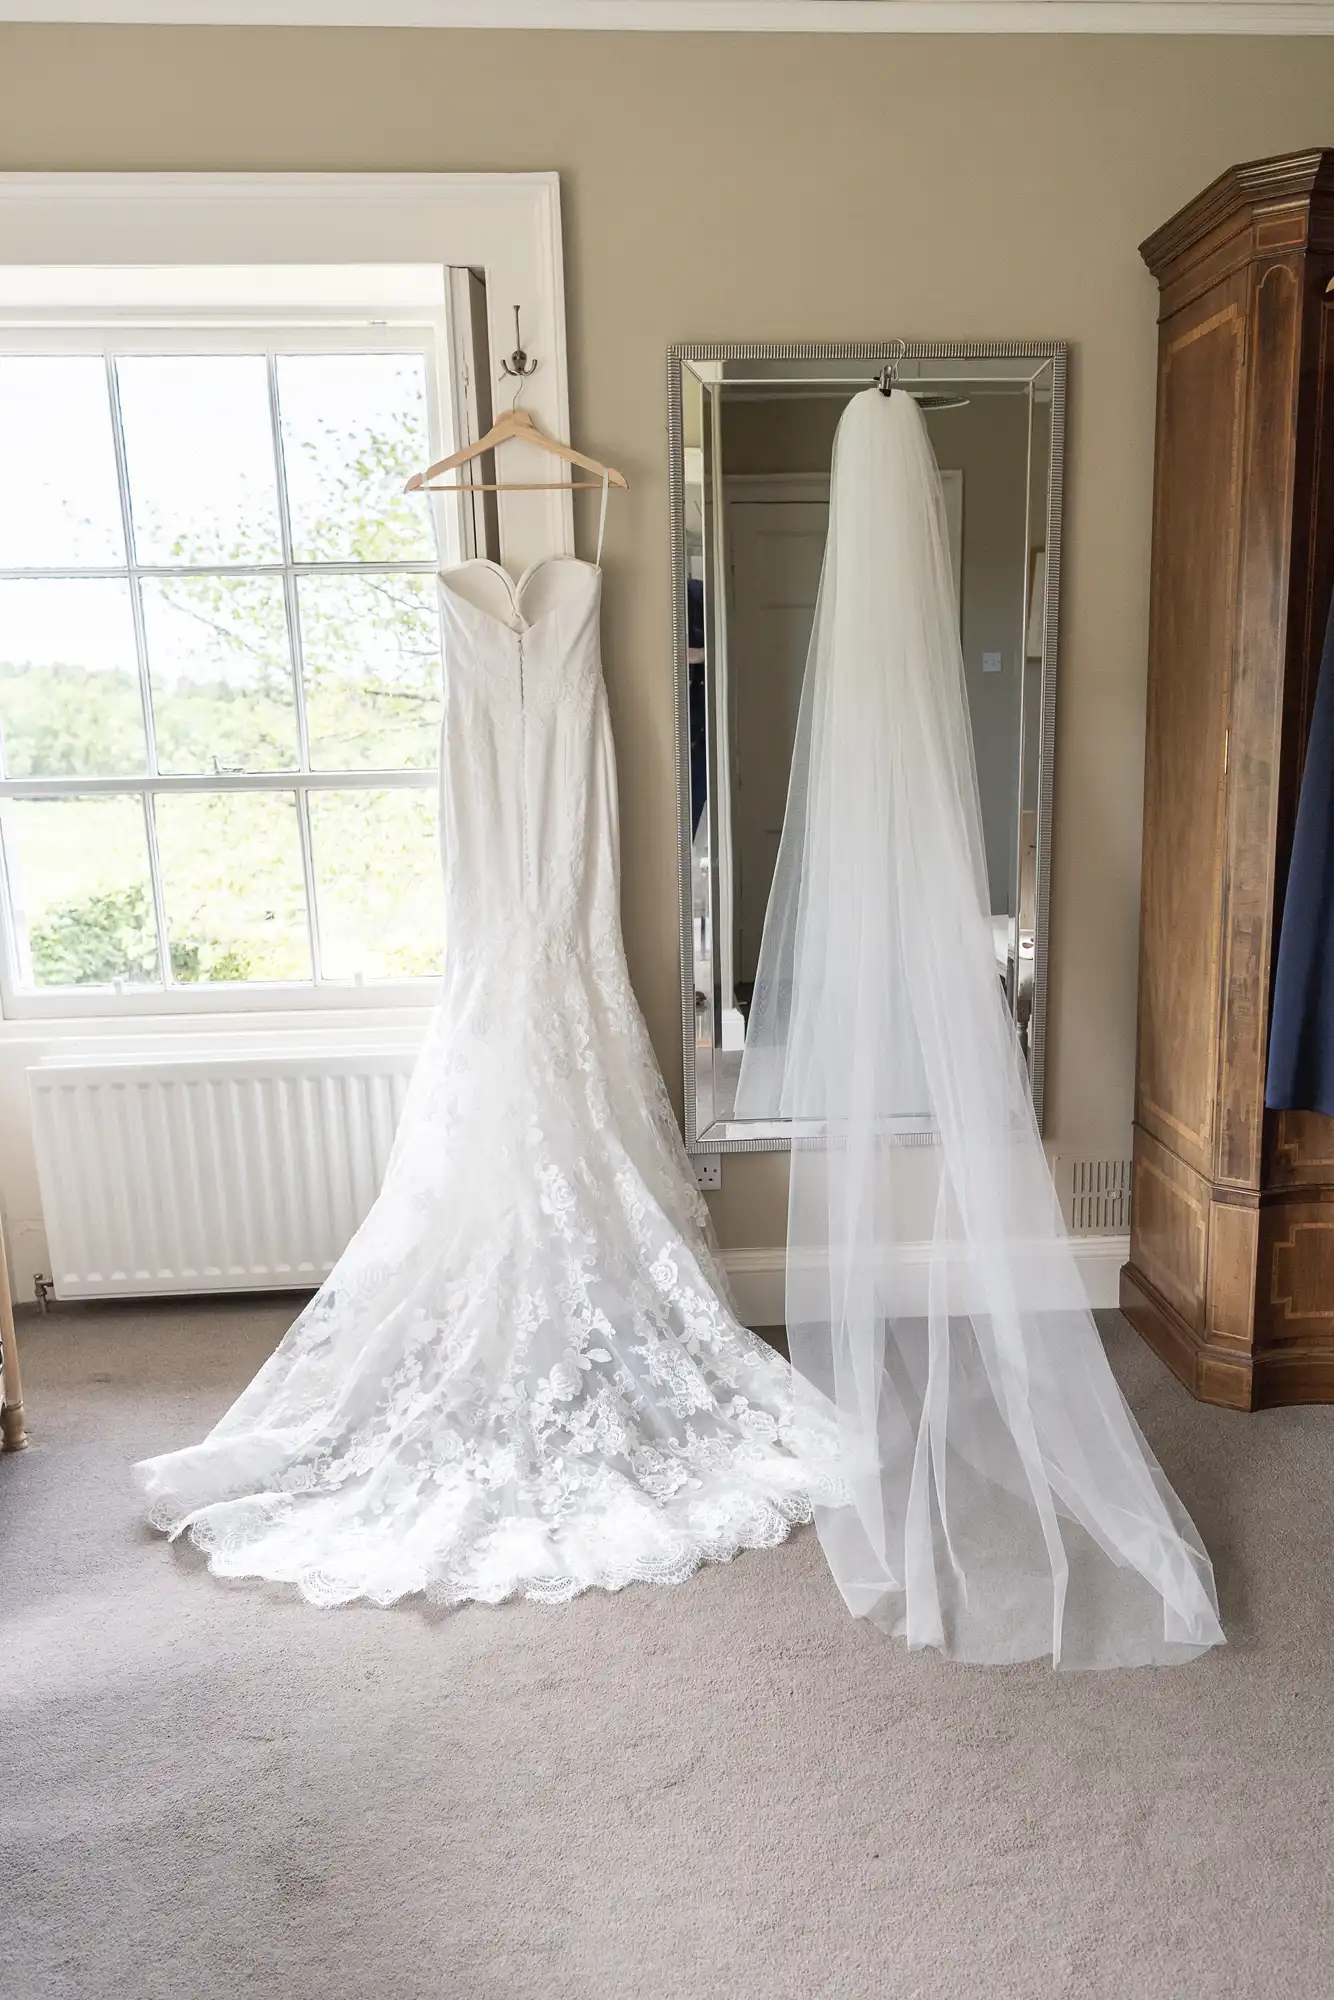 A wedding dress and veil hanging next to a window and a full-length mirror in a bright room.